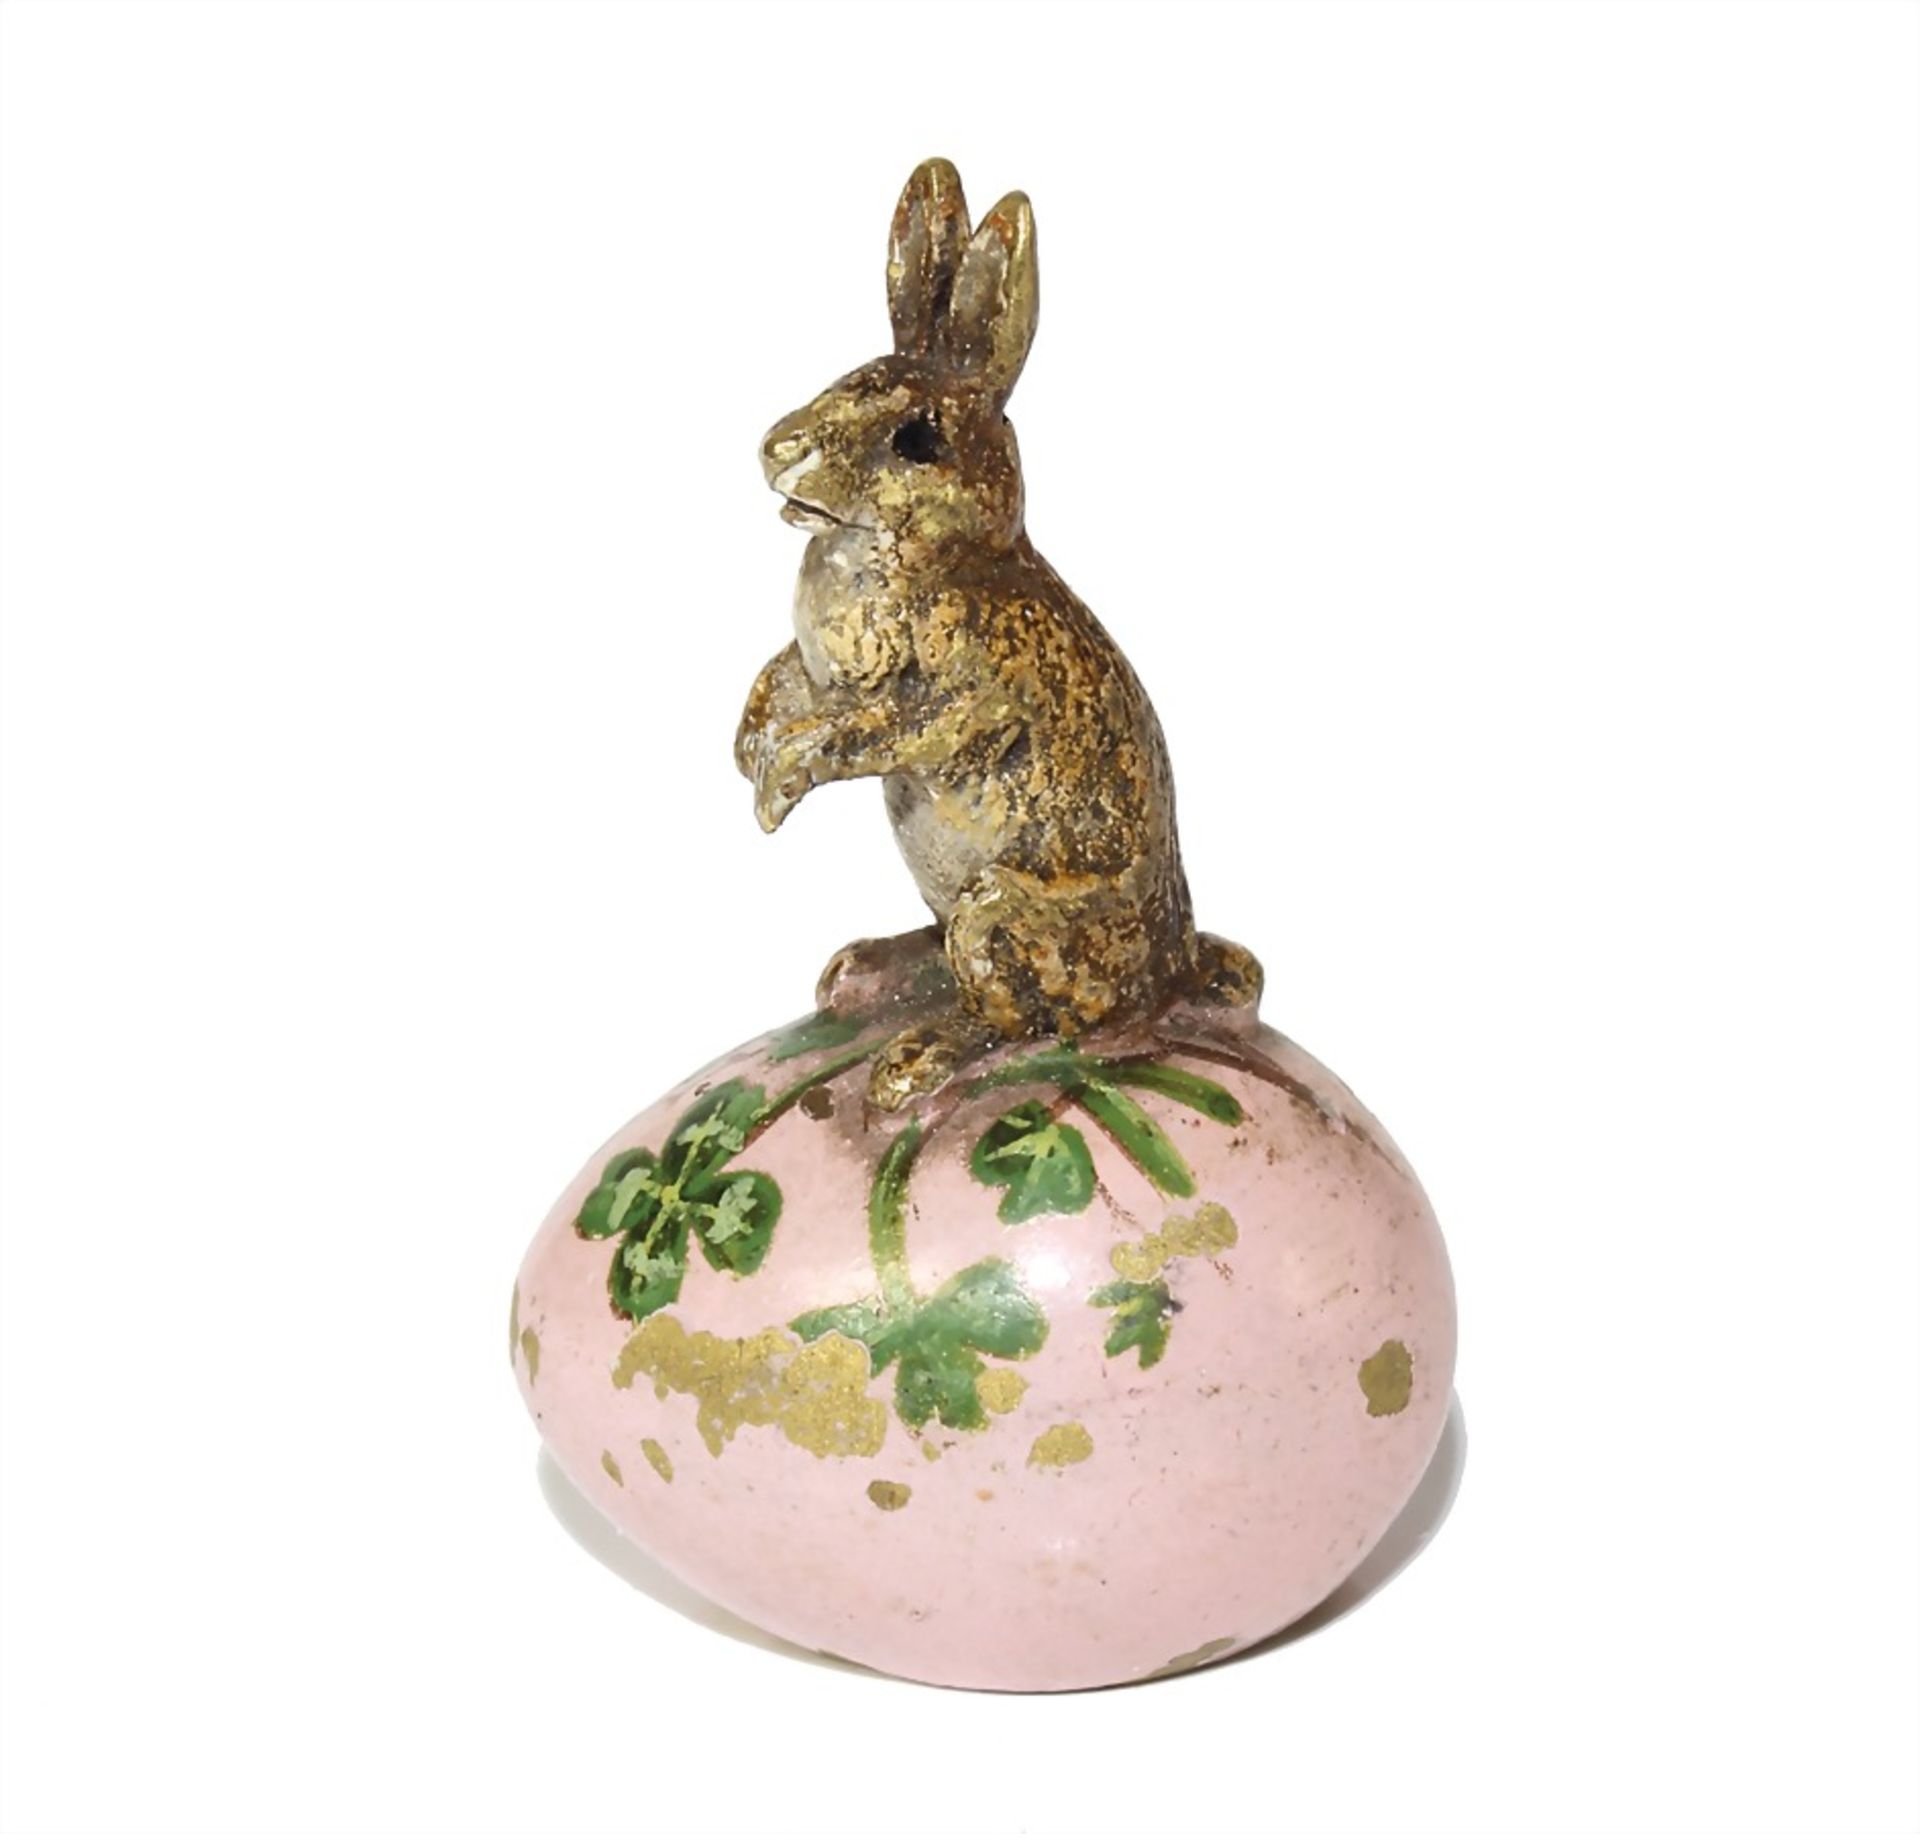 "WIENER BRONZE" around 1900, Easter egg with brown hare, signed: B (BERGMANN), colored painted